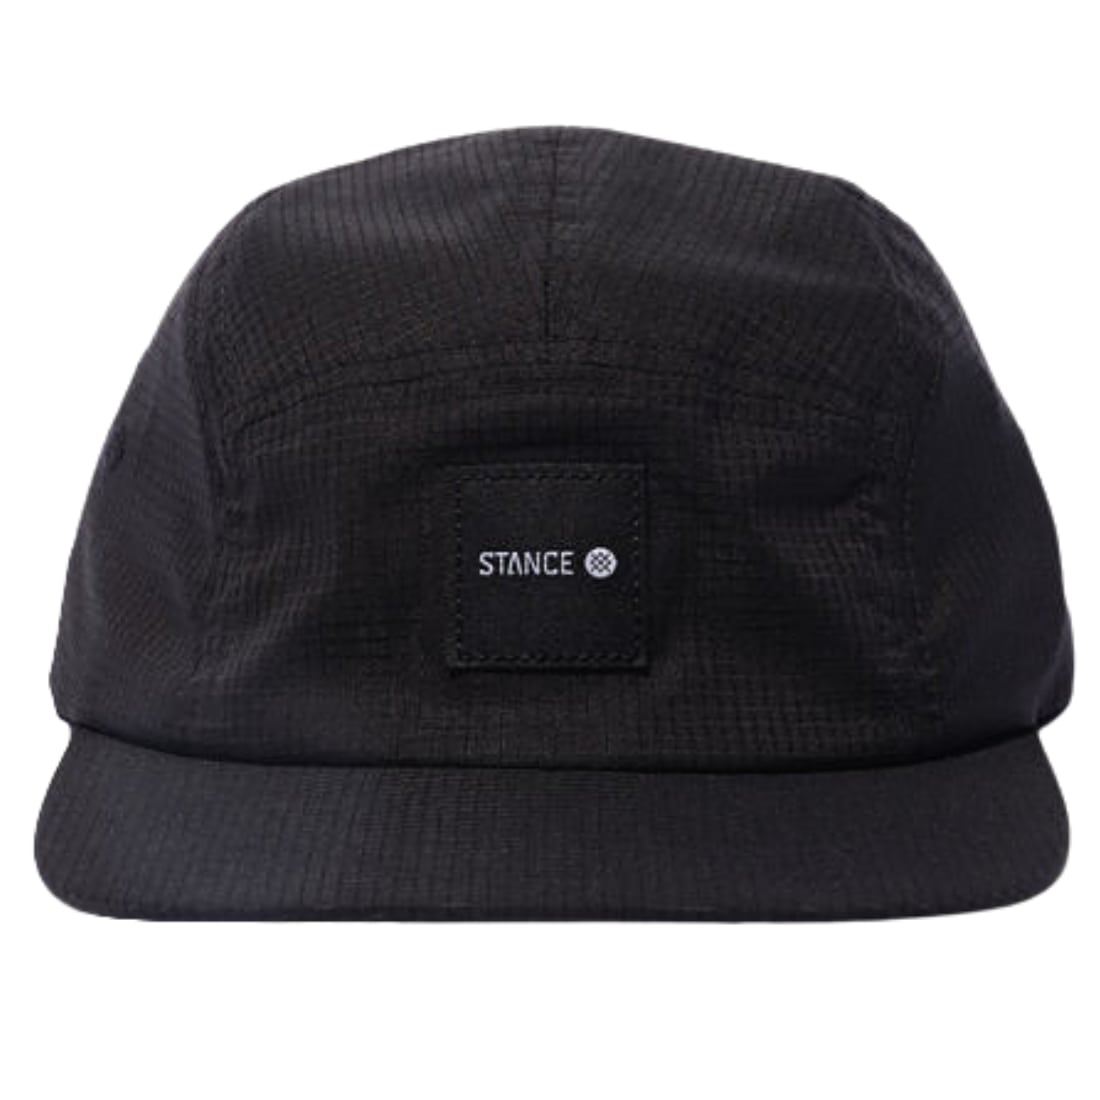 Stance Kinetic Adjustable Cap - Black - 5 Panel Cap by Stance One Size